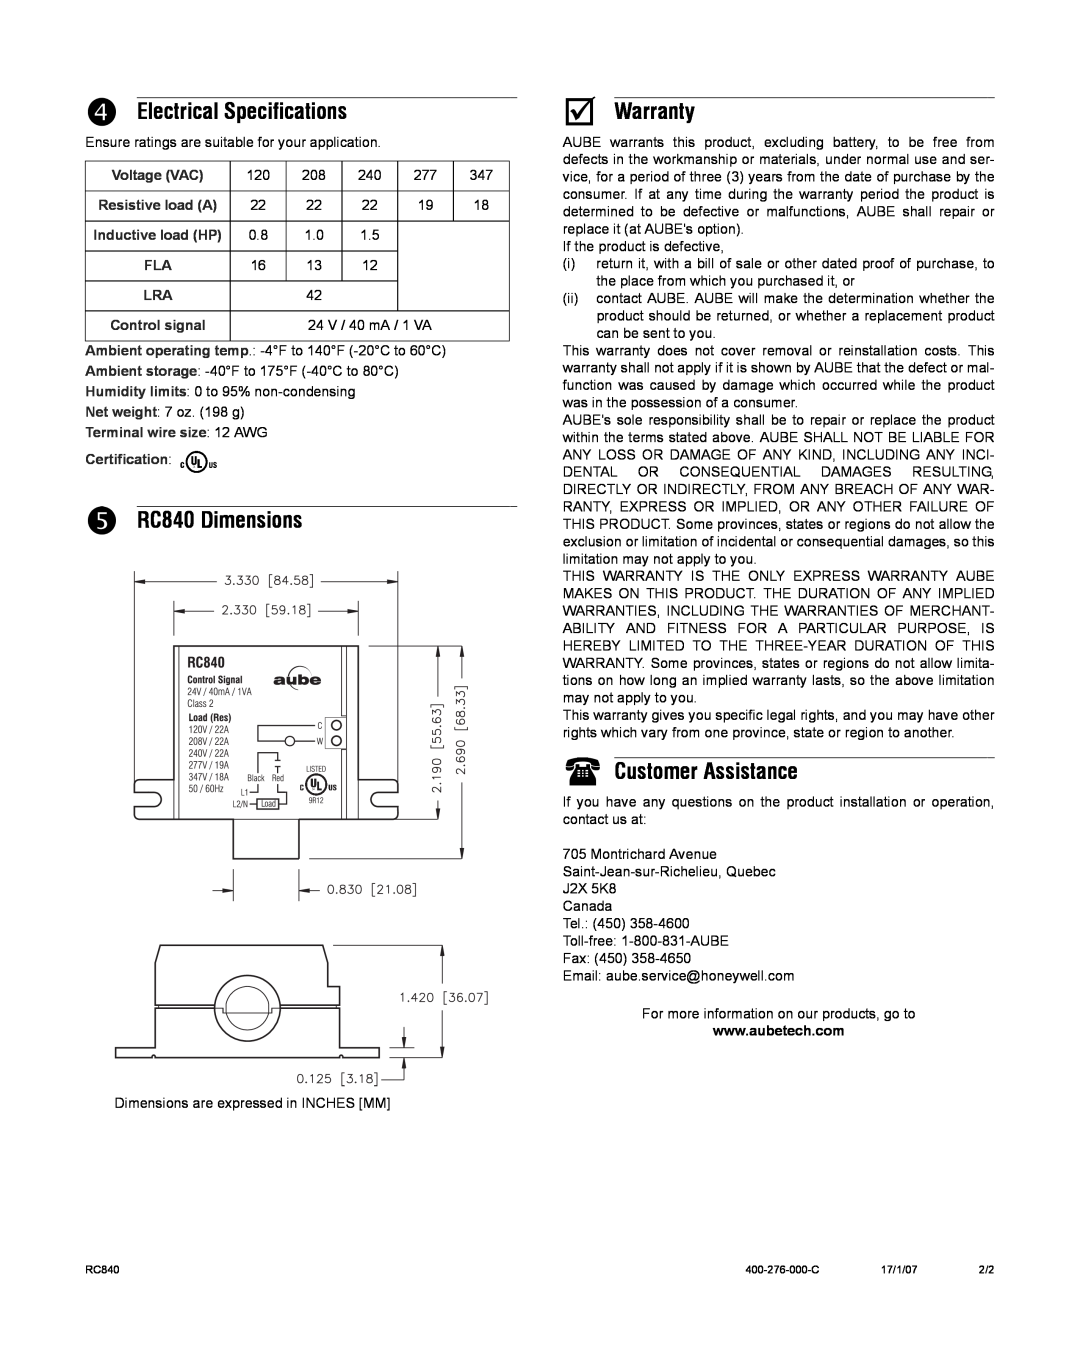 Aube Technologies manual q Electrical Specifications, r RC840 Dimensions, Warranty, Customer Assistance, Voltage VAC 